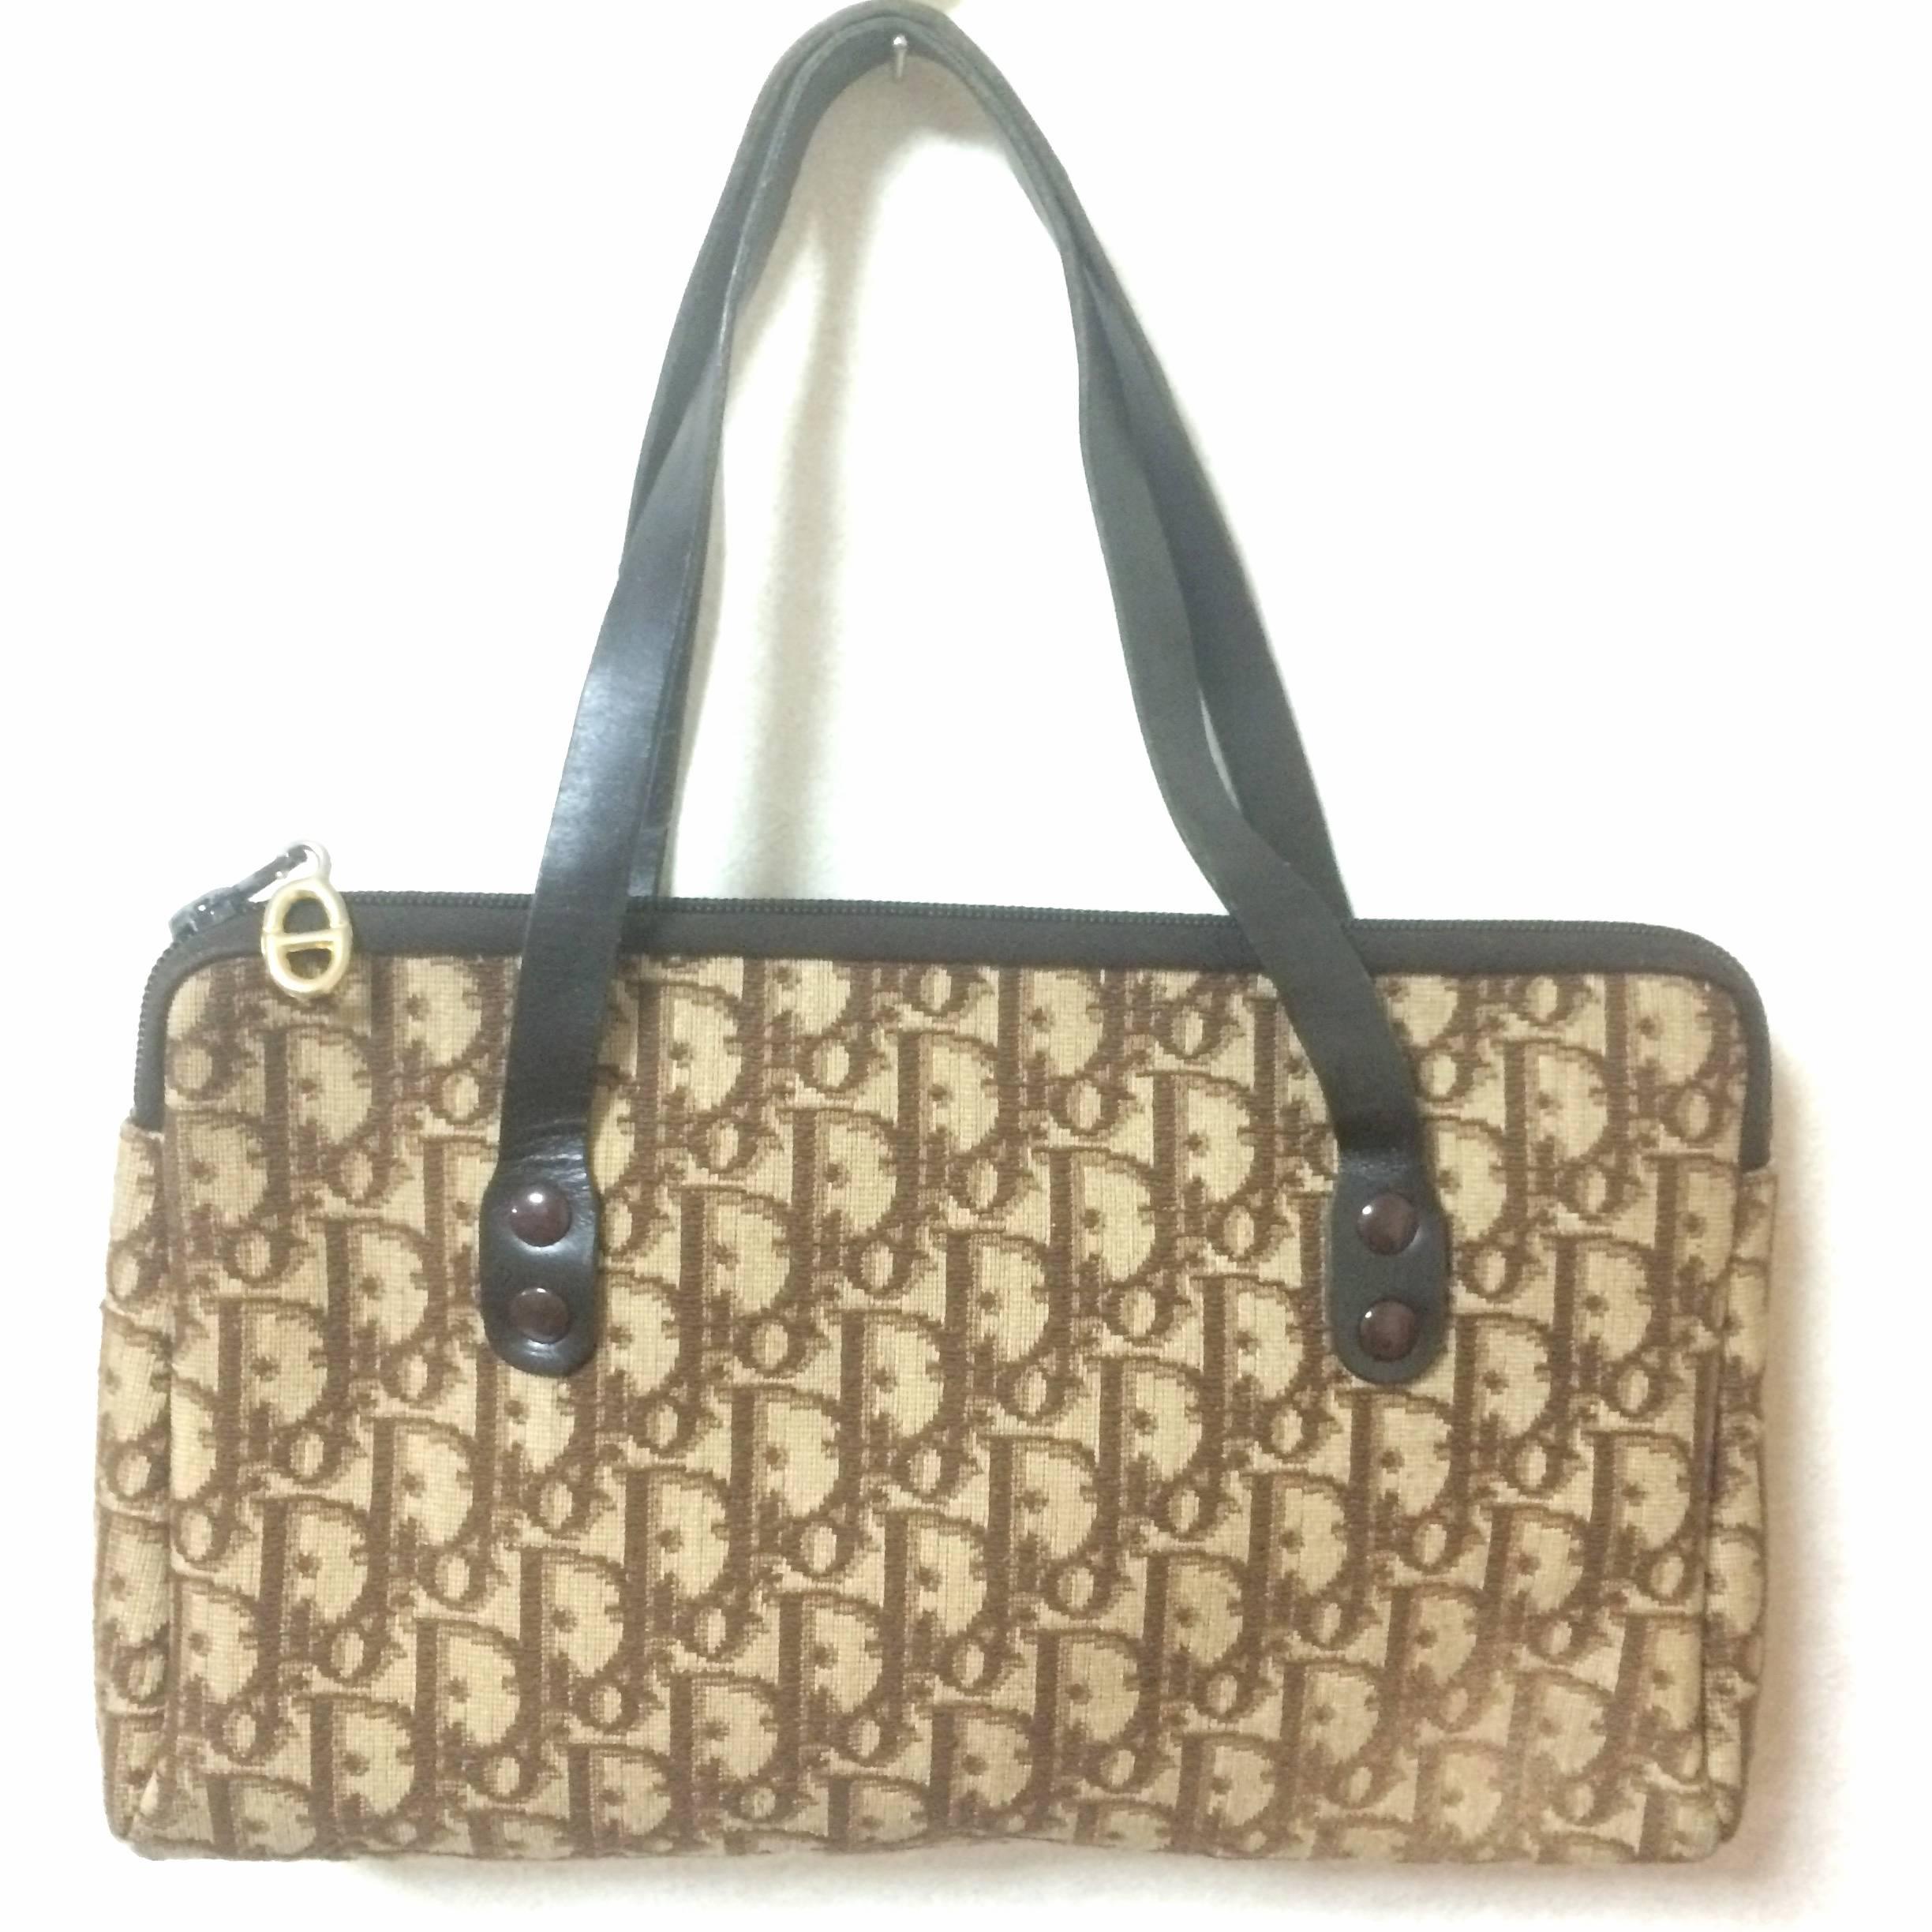 1980s. Vintage Christian Dior brown trotter jacquard mini handbag with leather handles.

This is a vintage piece from Christian Dior approx from 70-80s. 
The rough woven jacquard will make you feel its warmness and atmosphere back in the old era.